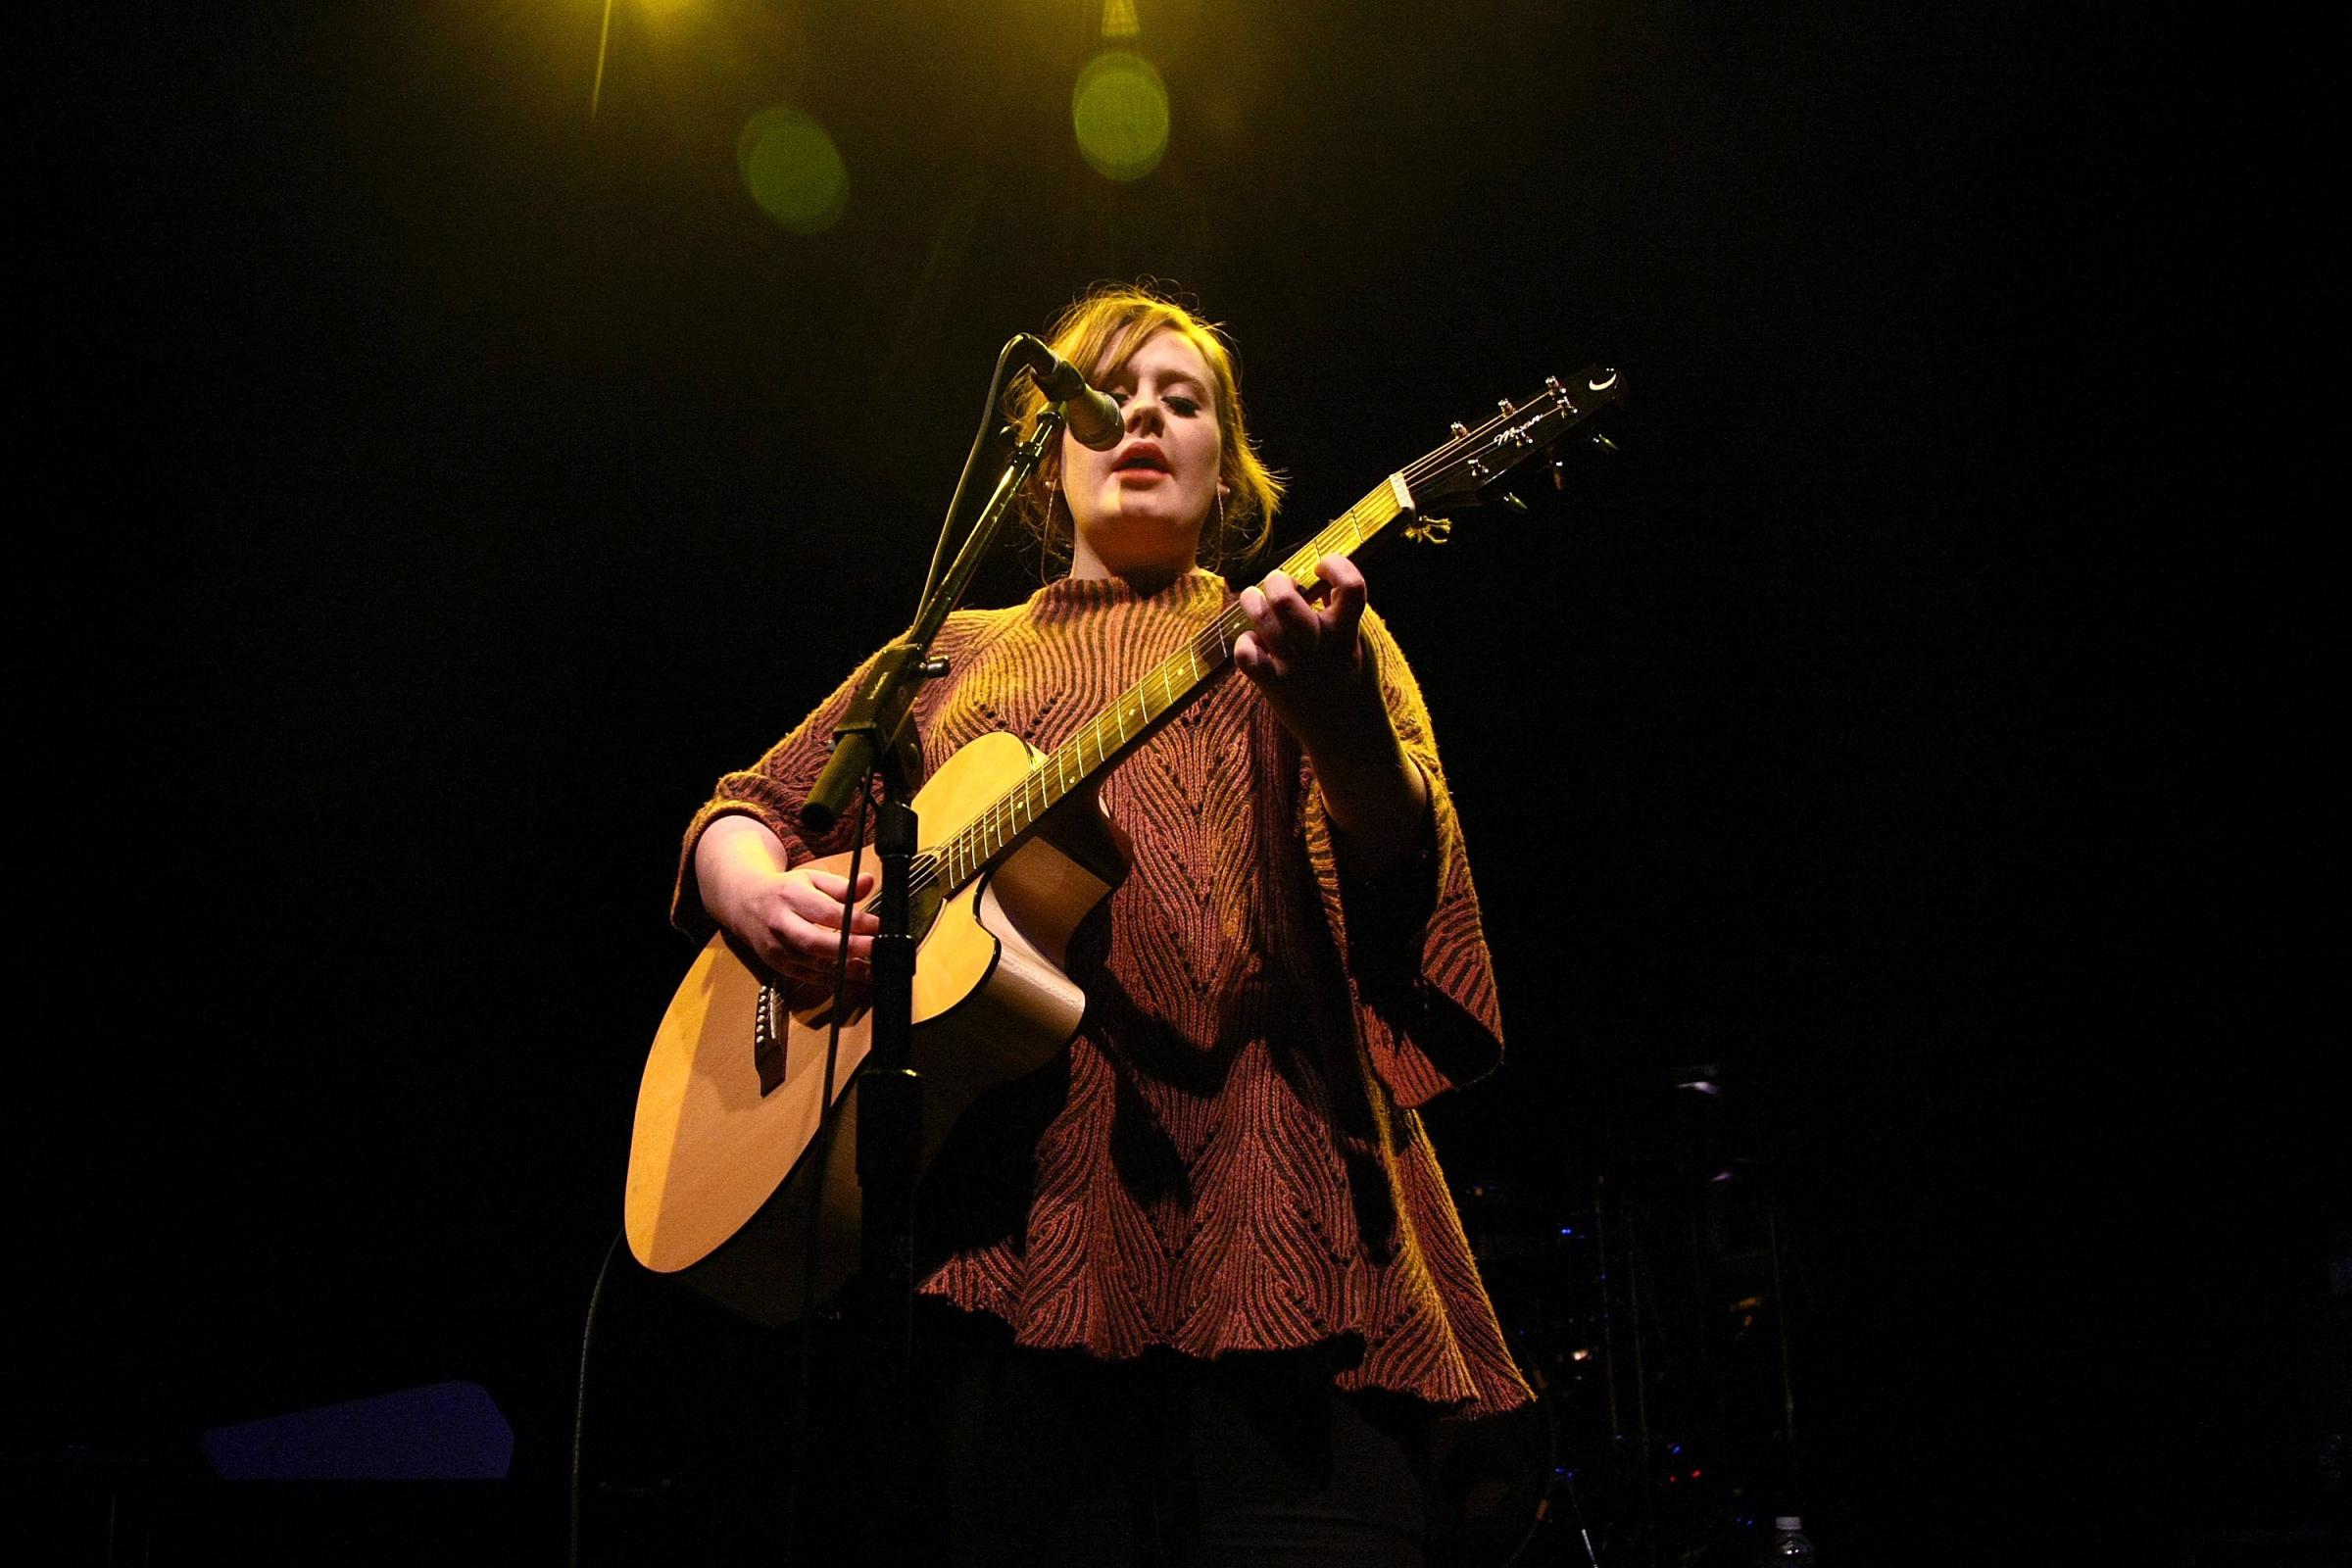 WASHINGTON - JANUARY 17: Musician Adele performs at the 9:30 Club on January 17, 2009 in Washington, DC. (Photo by Michael Loccisano/Getty Images)